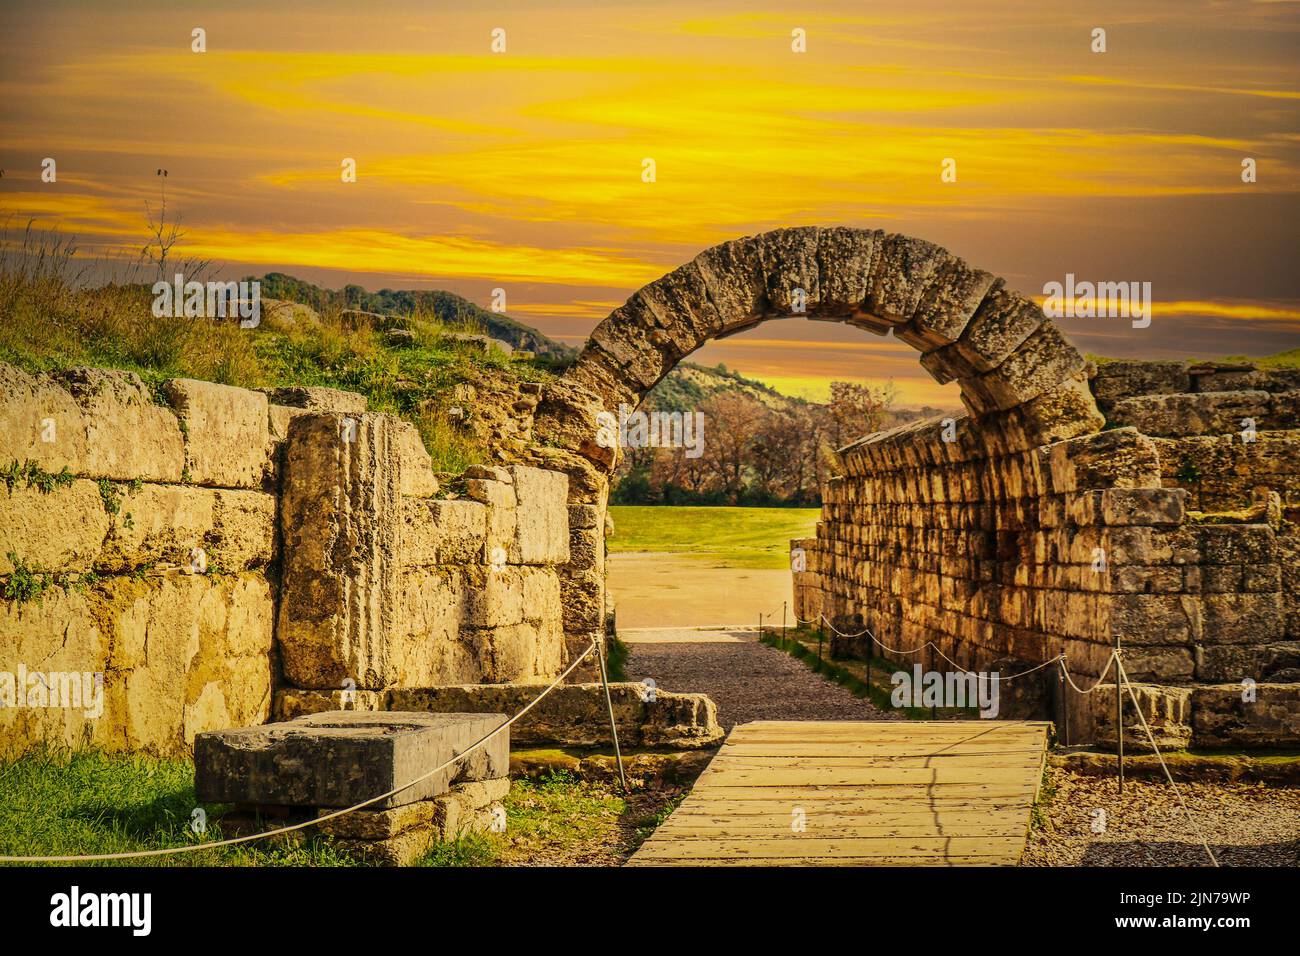 Stadium entrance  - Stone walls and arch entering the field where first  Pah Hellenic games  took place in Olympia Greece at sunset. Stock Photo